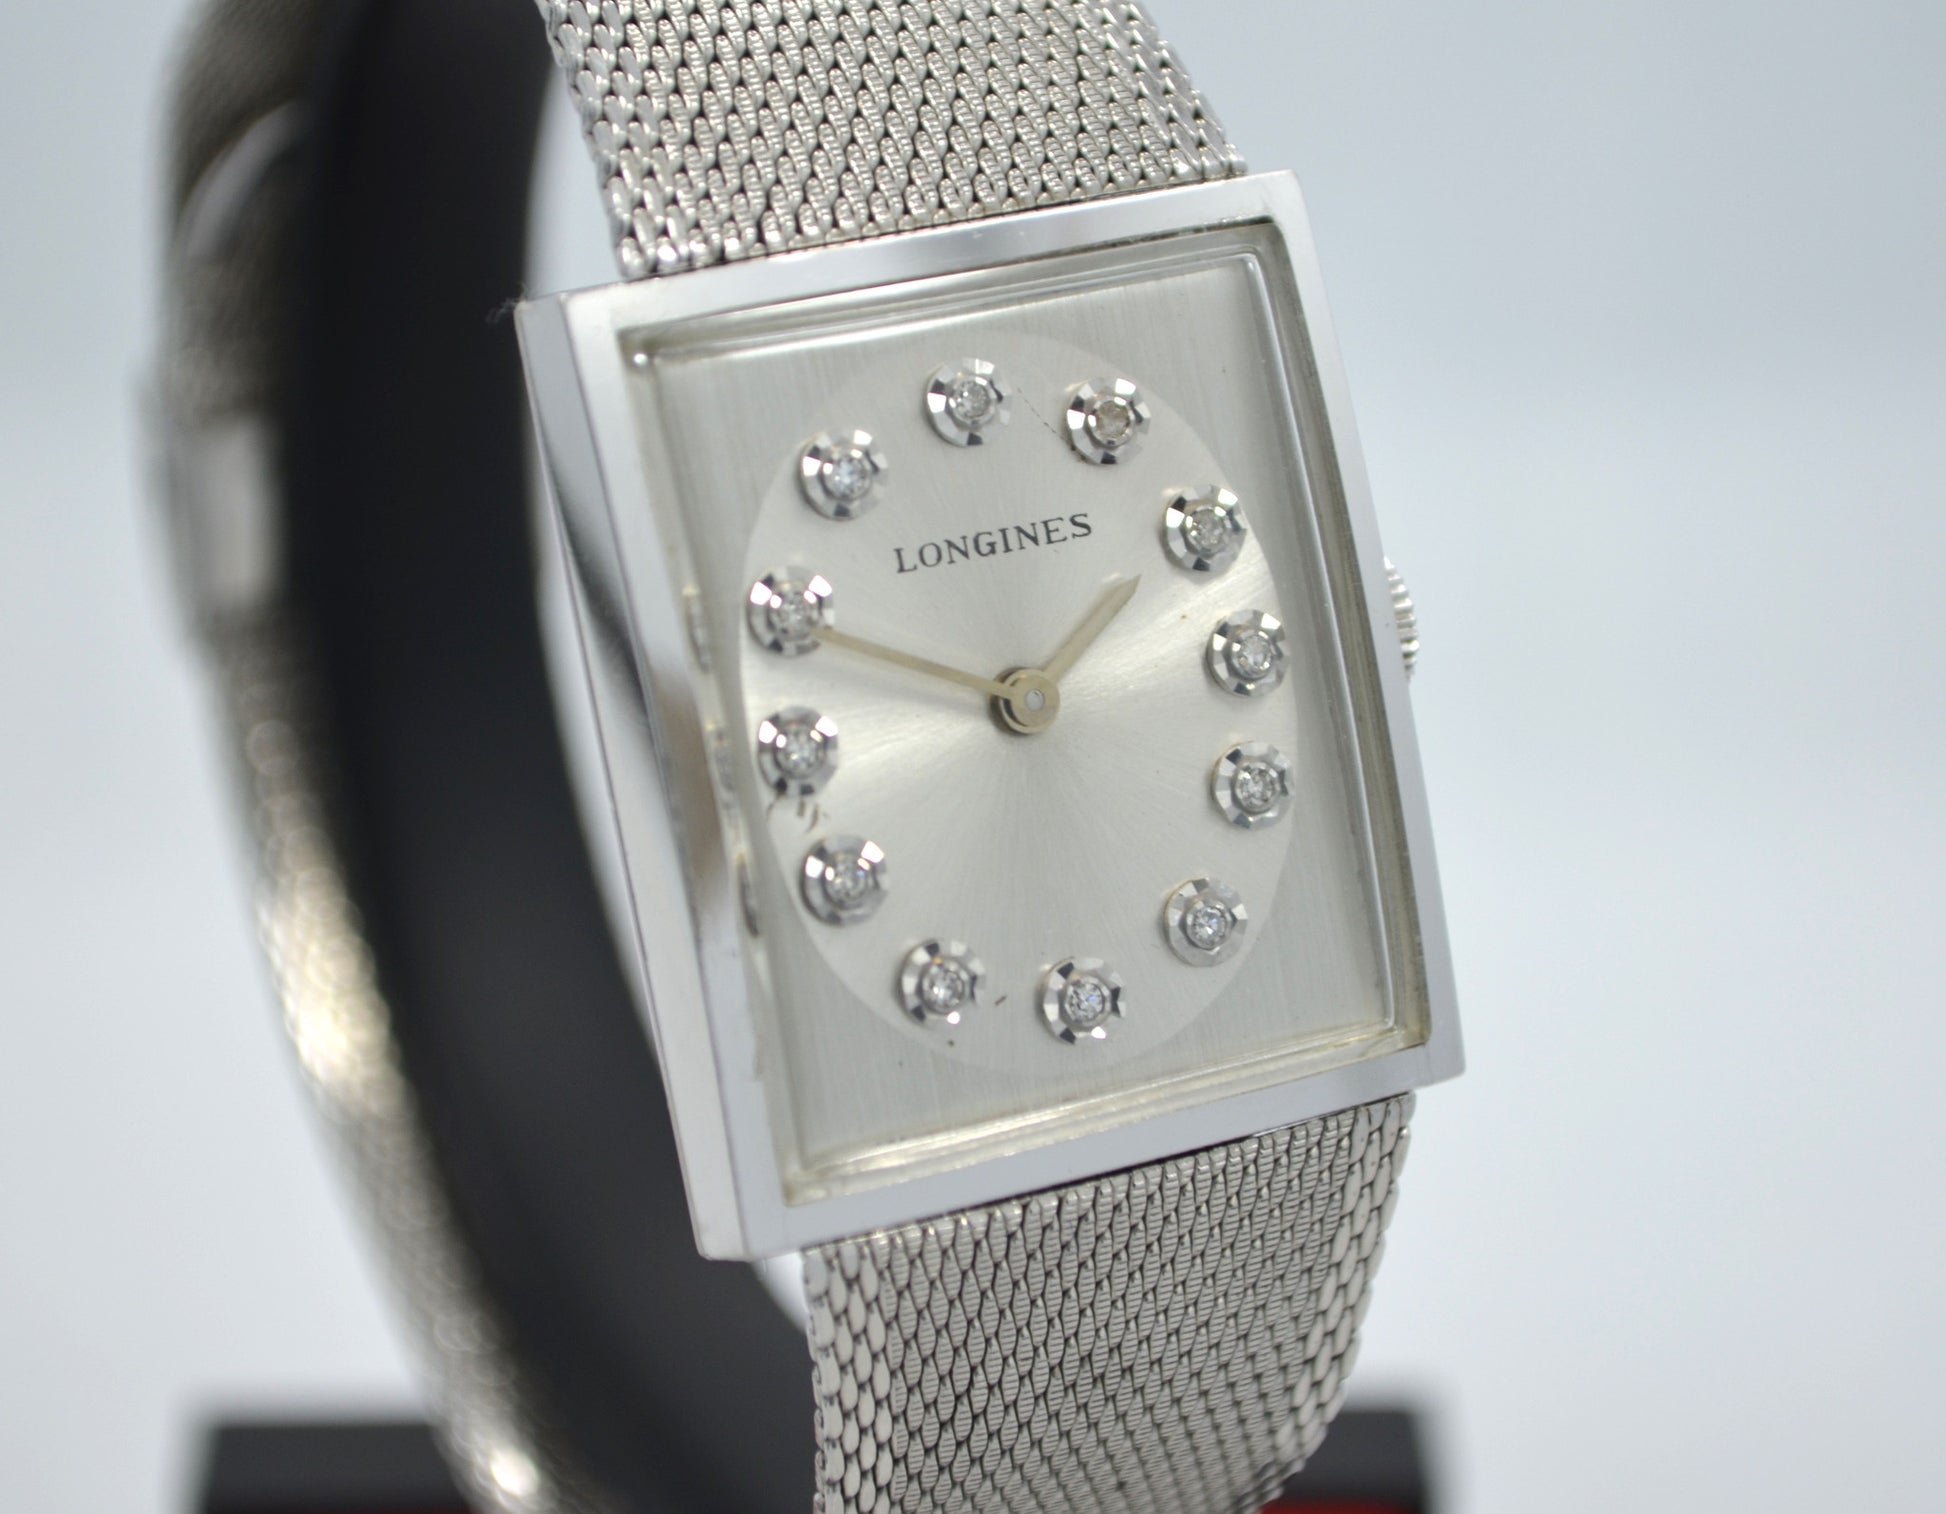 Vintage Longines 14K White Gold Diamond Stainless Steel Cal. L 847.4 Wristwatch - Hashtag Watch Company